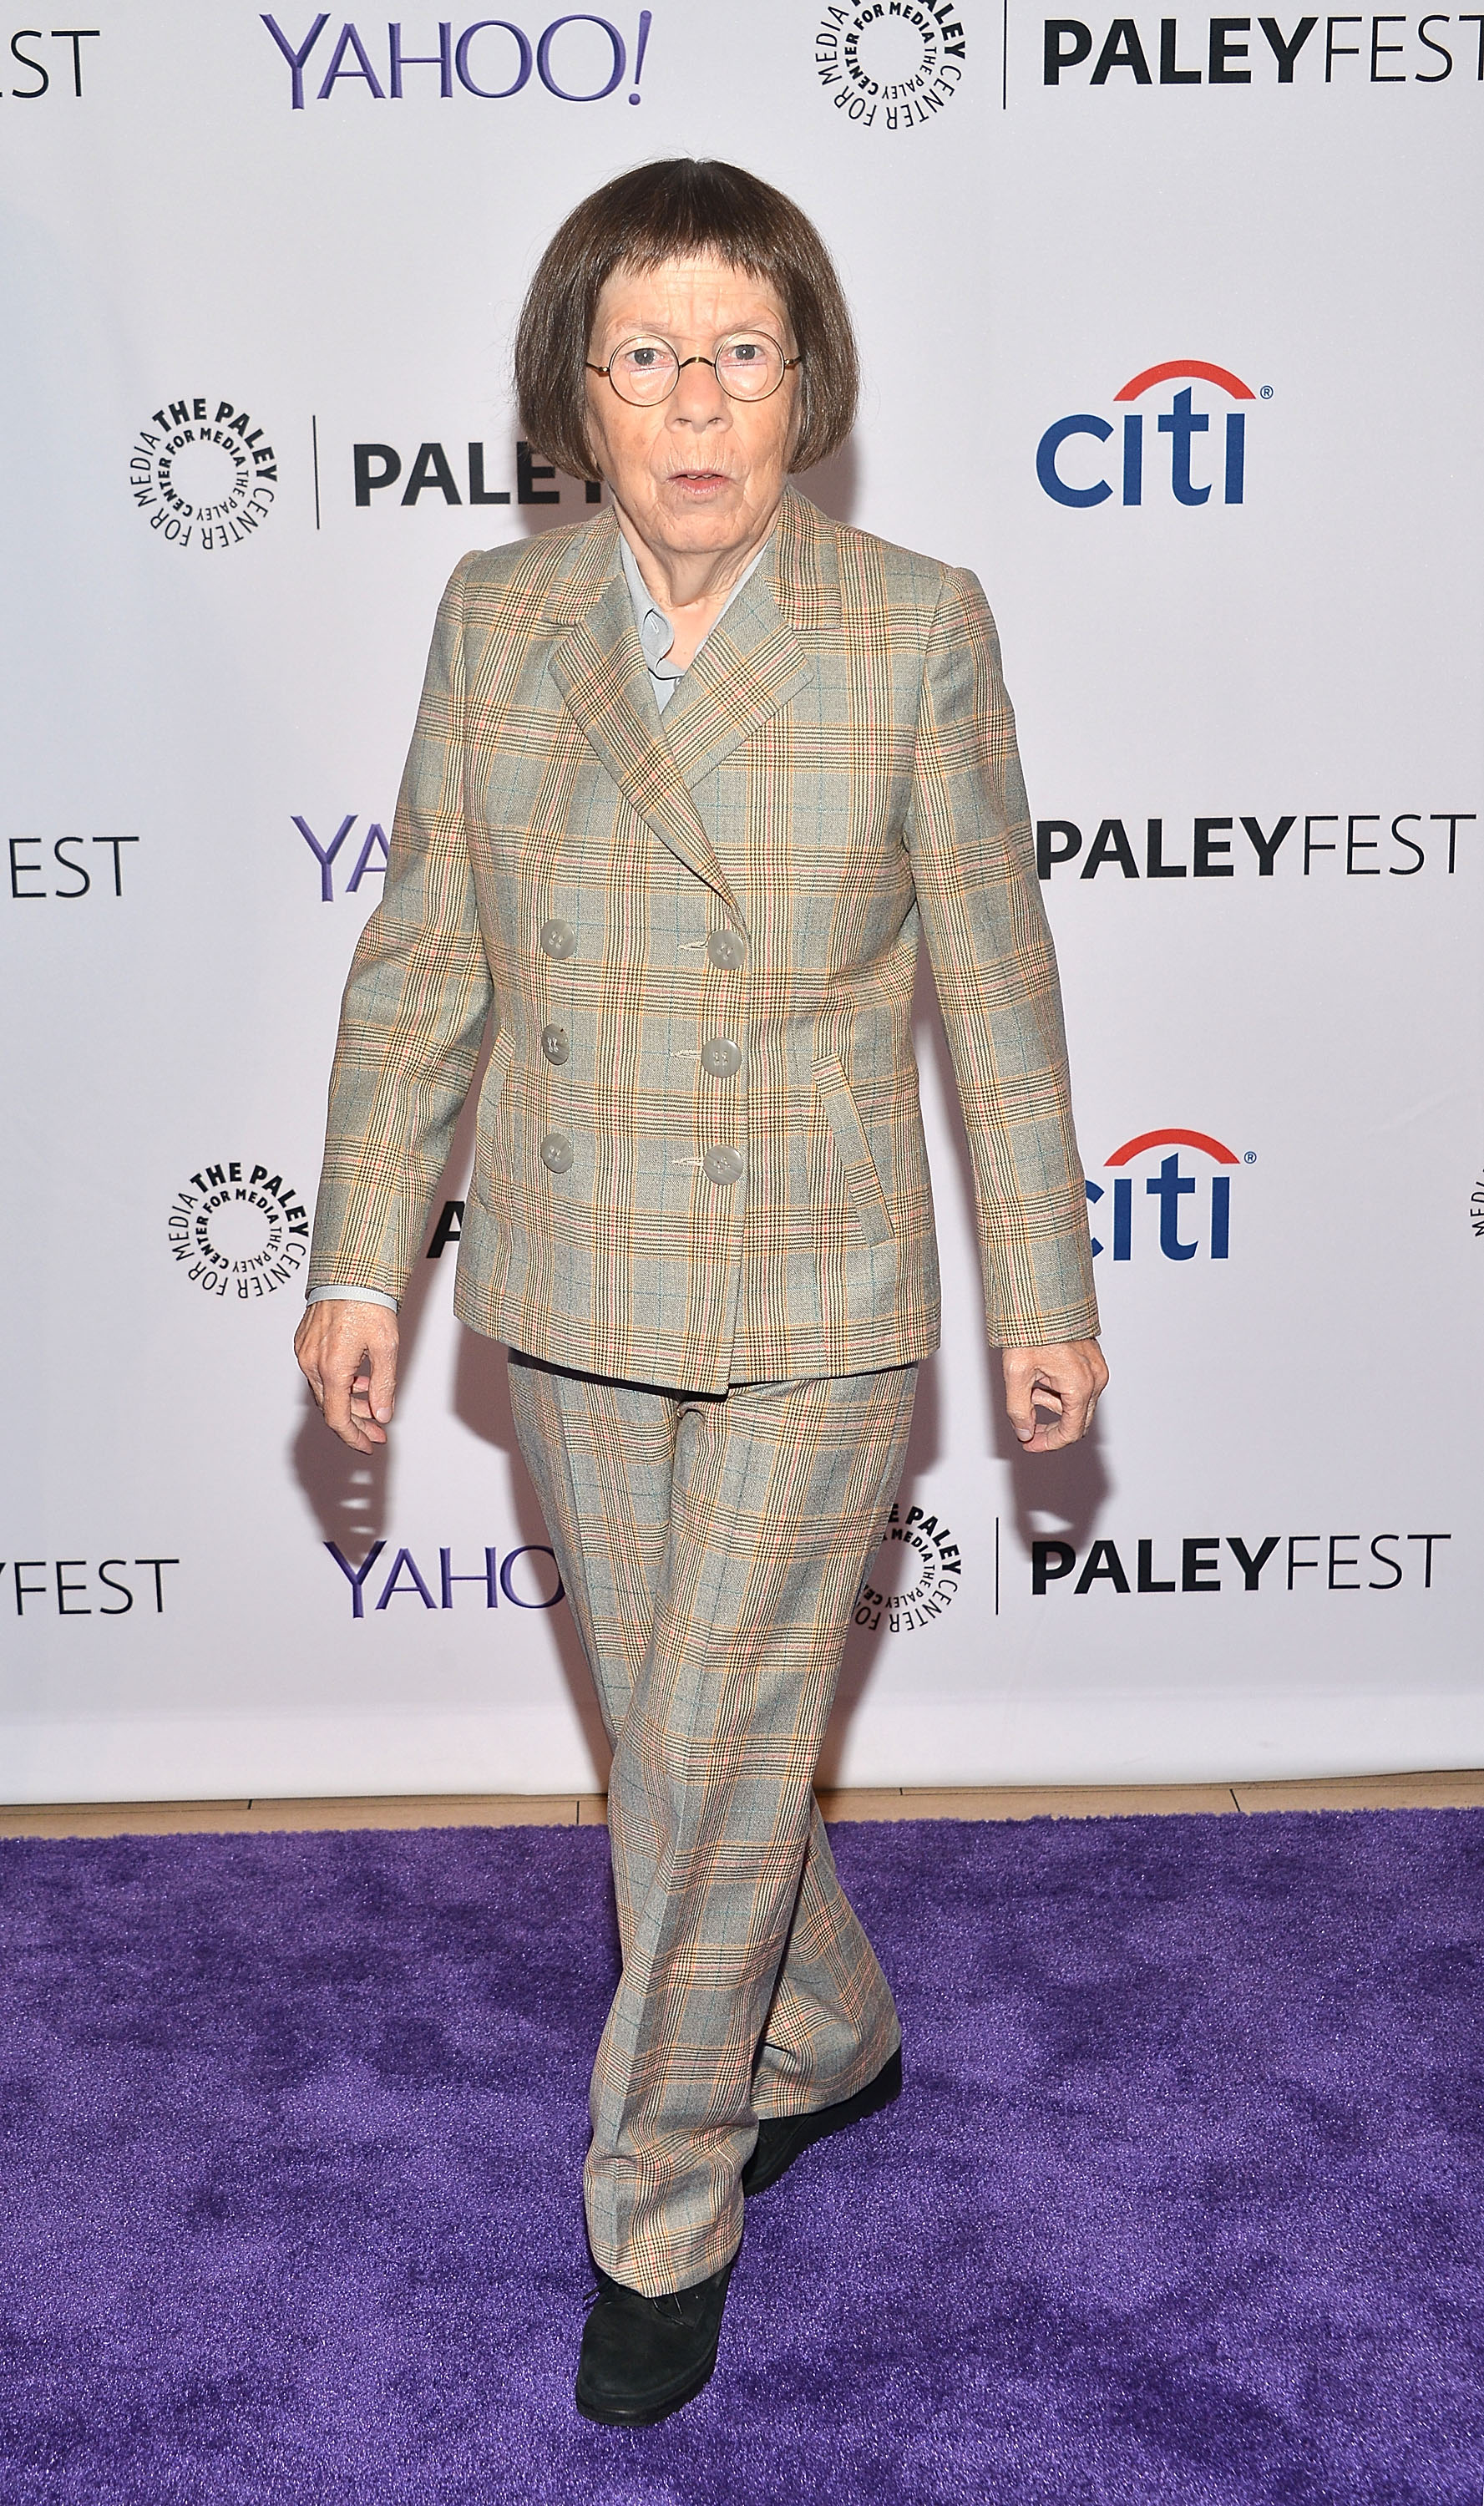 Linda Hunt attends The Paley Center for Media's PaleyFest 2015 Fall TV preview of "NCIS: Los Angeles" at The Paley Center for Media on September 11, 2015, in Beverly Hills, California. | Source: Getty Images